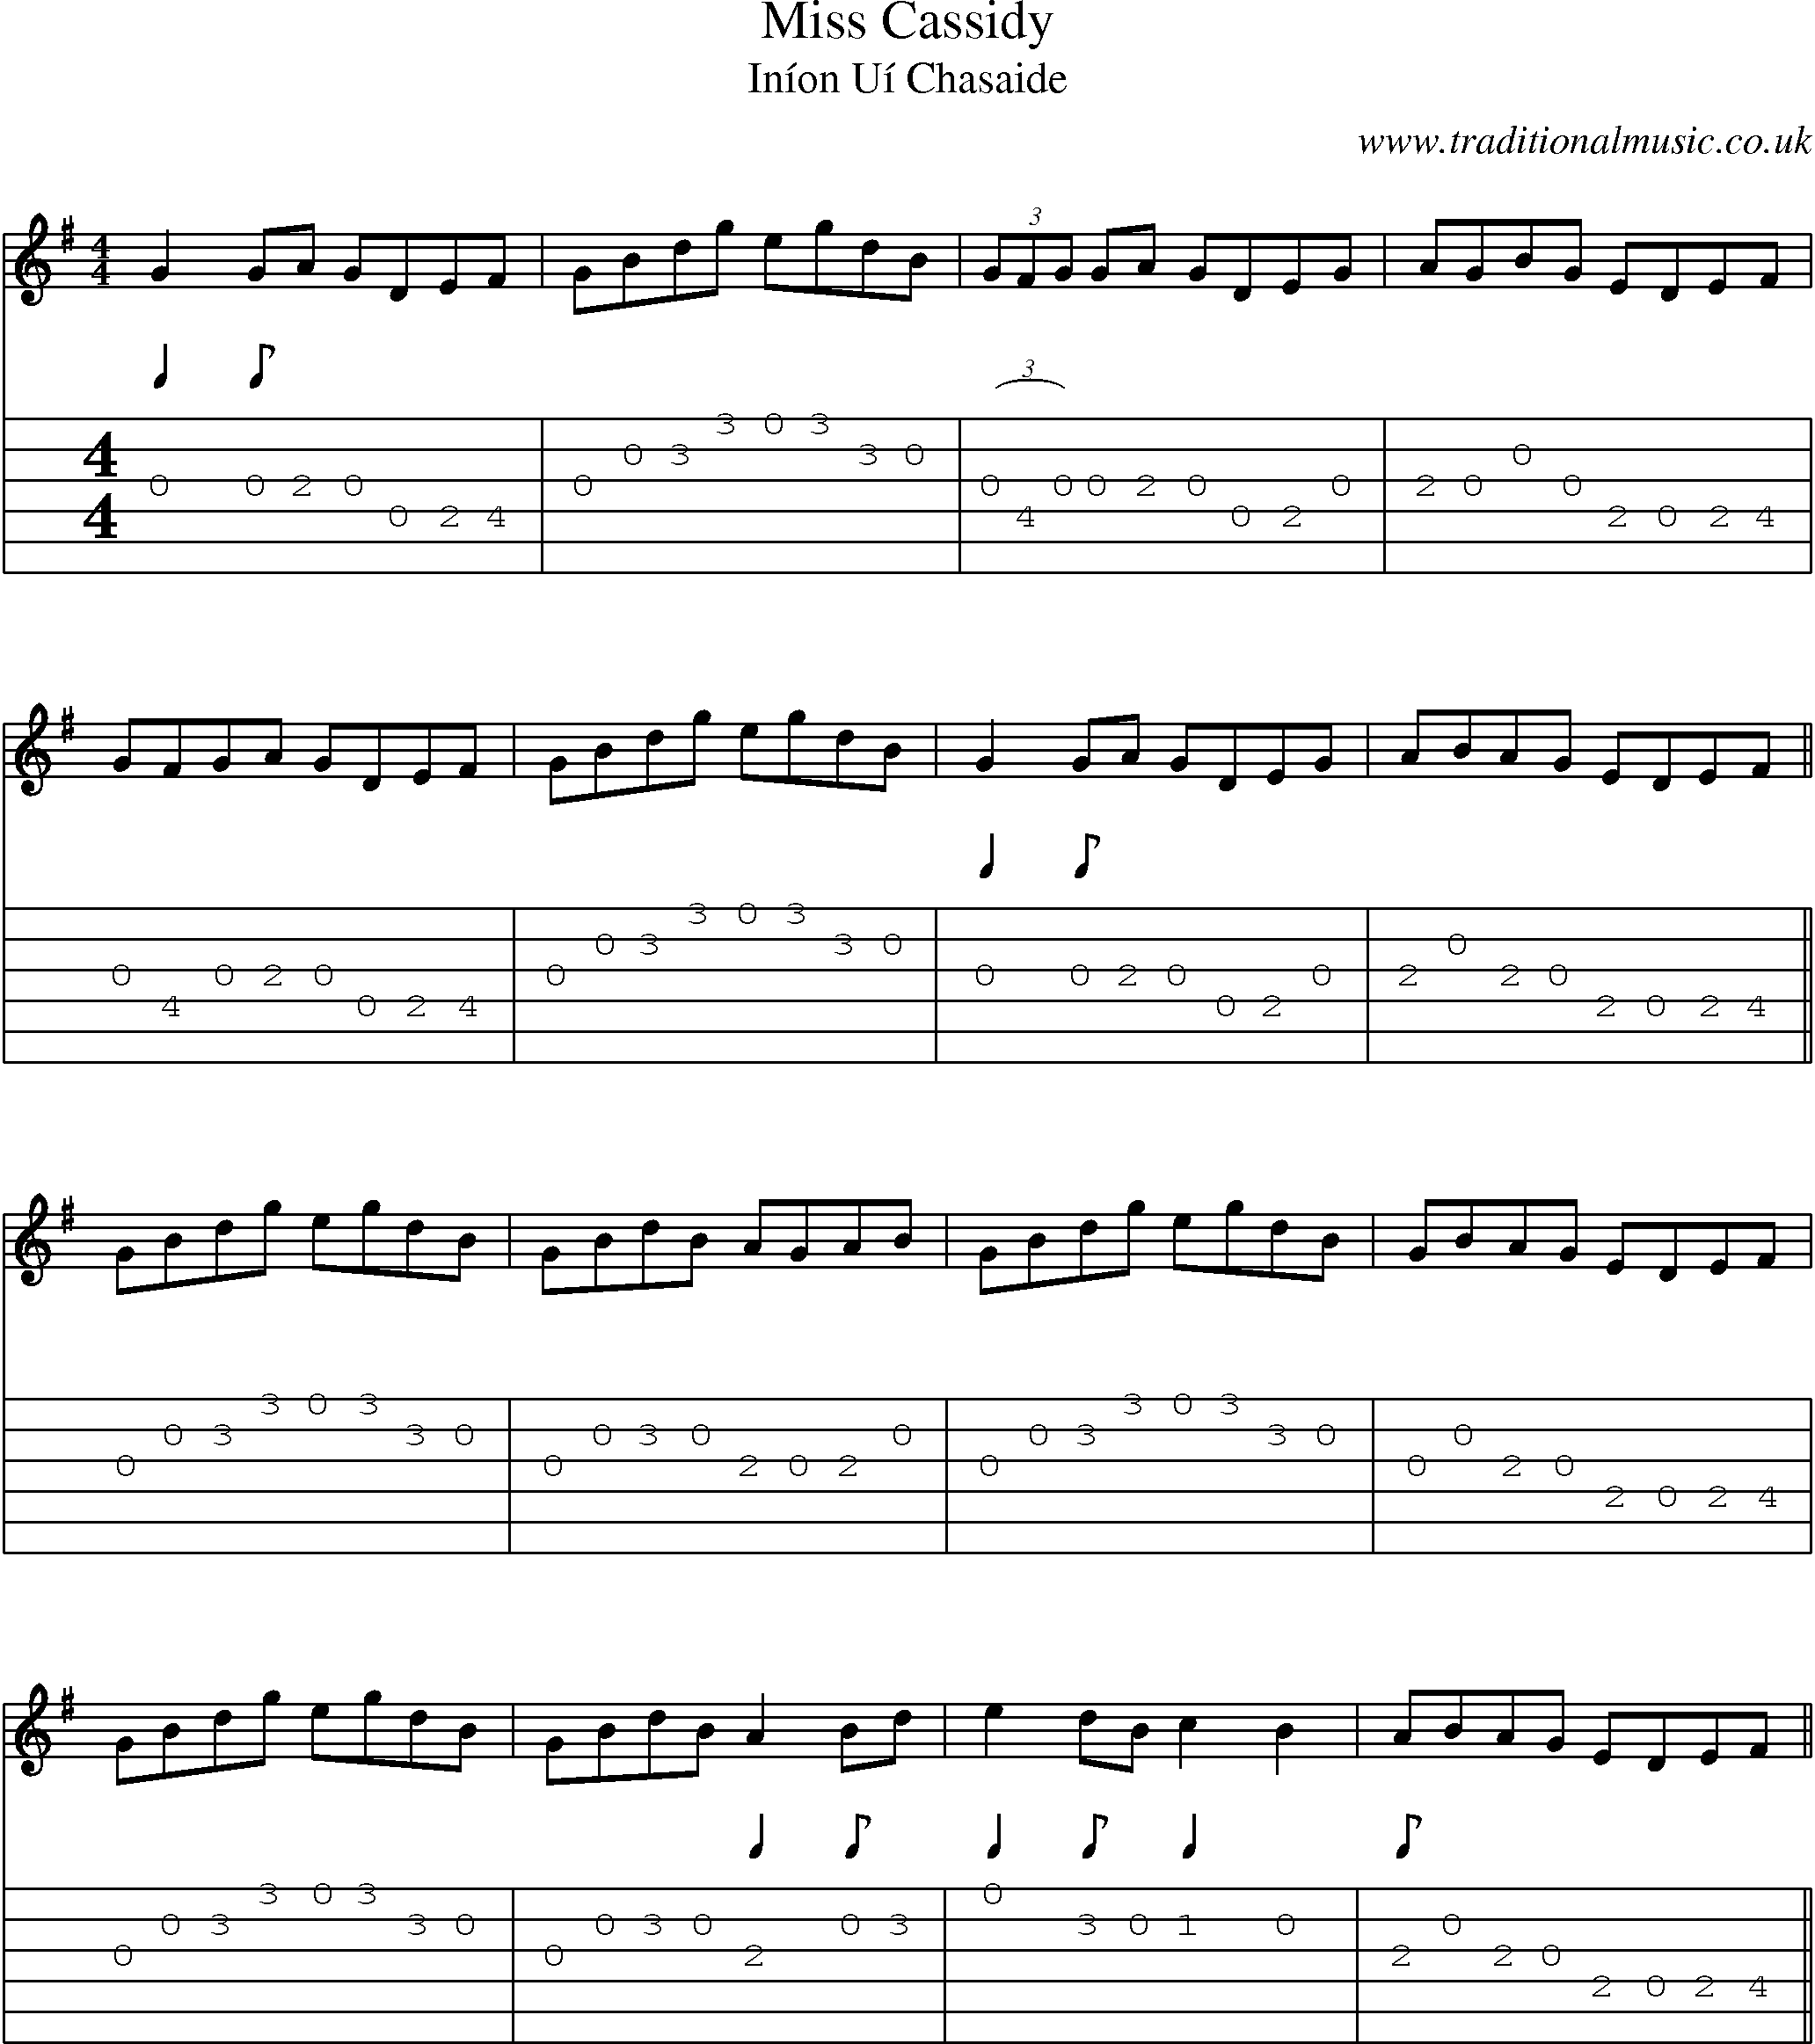 Music Score and Guitar Tabs for Miss Cassidy